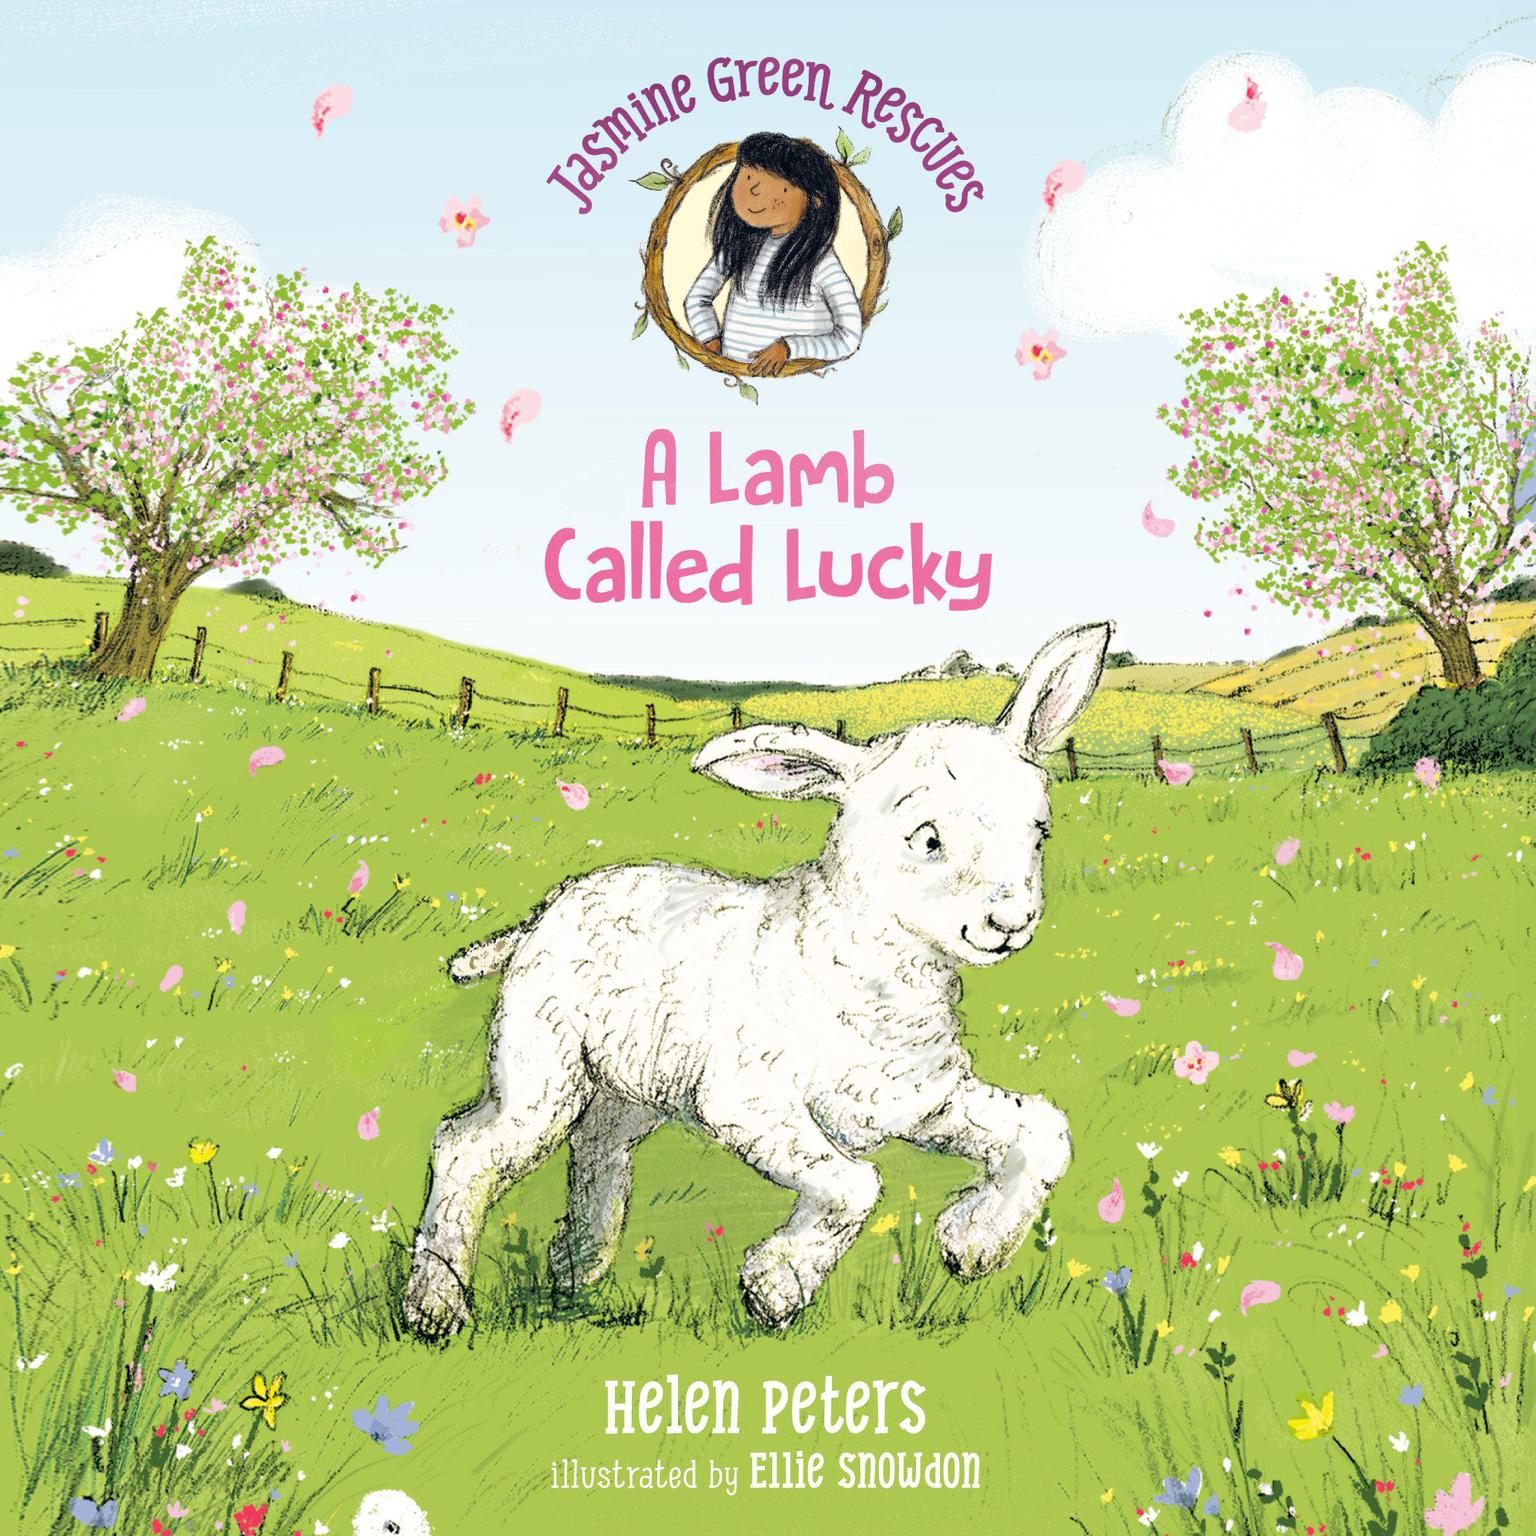 Jasmine Green Rescues: A Lamb Called Lucky Audiobook, by Helen Peters